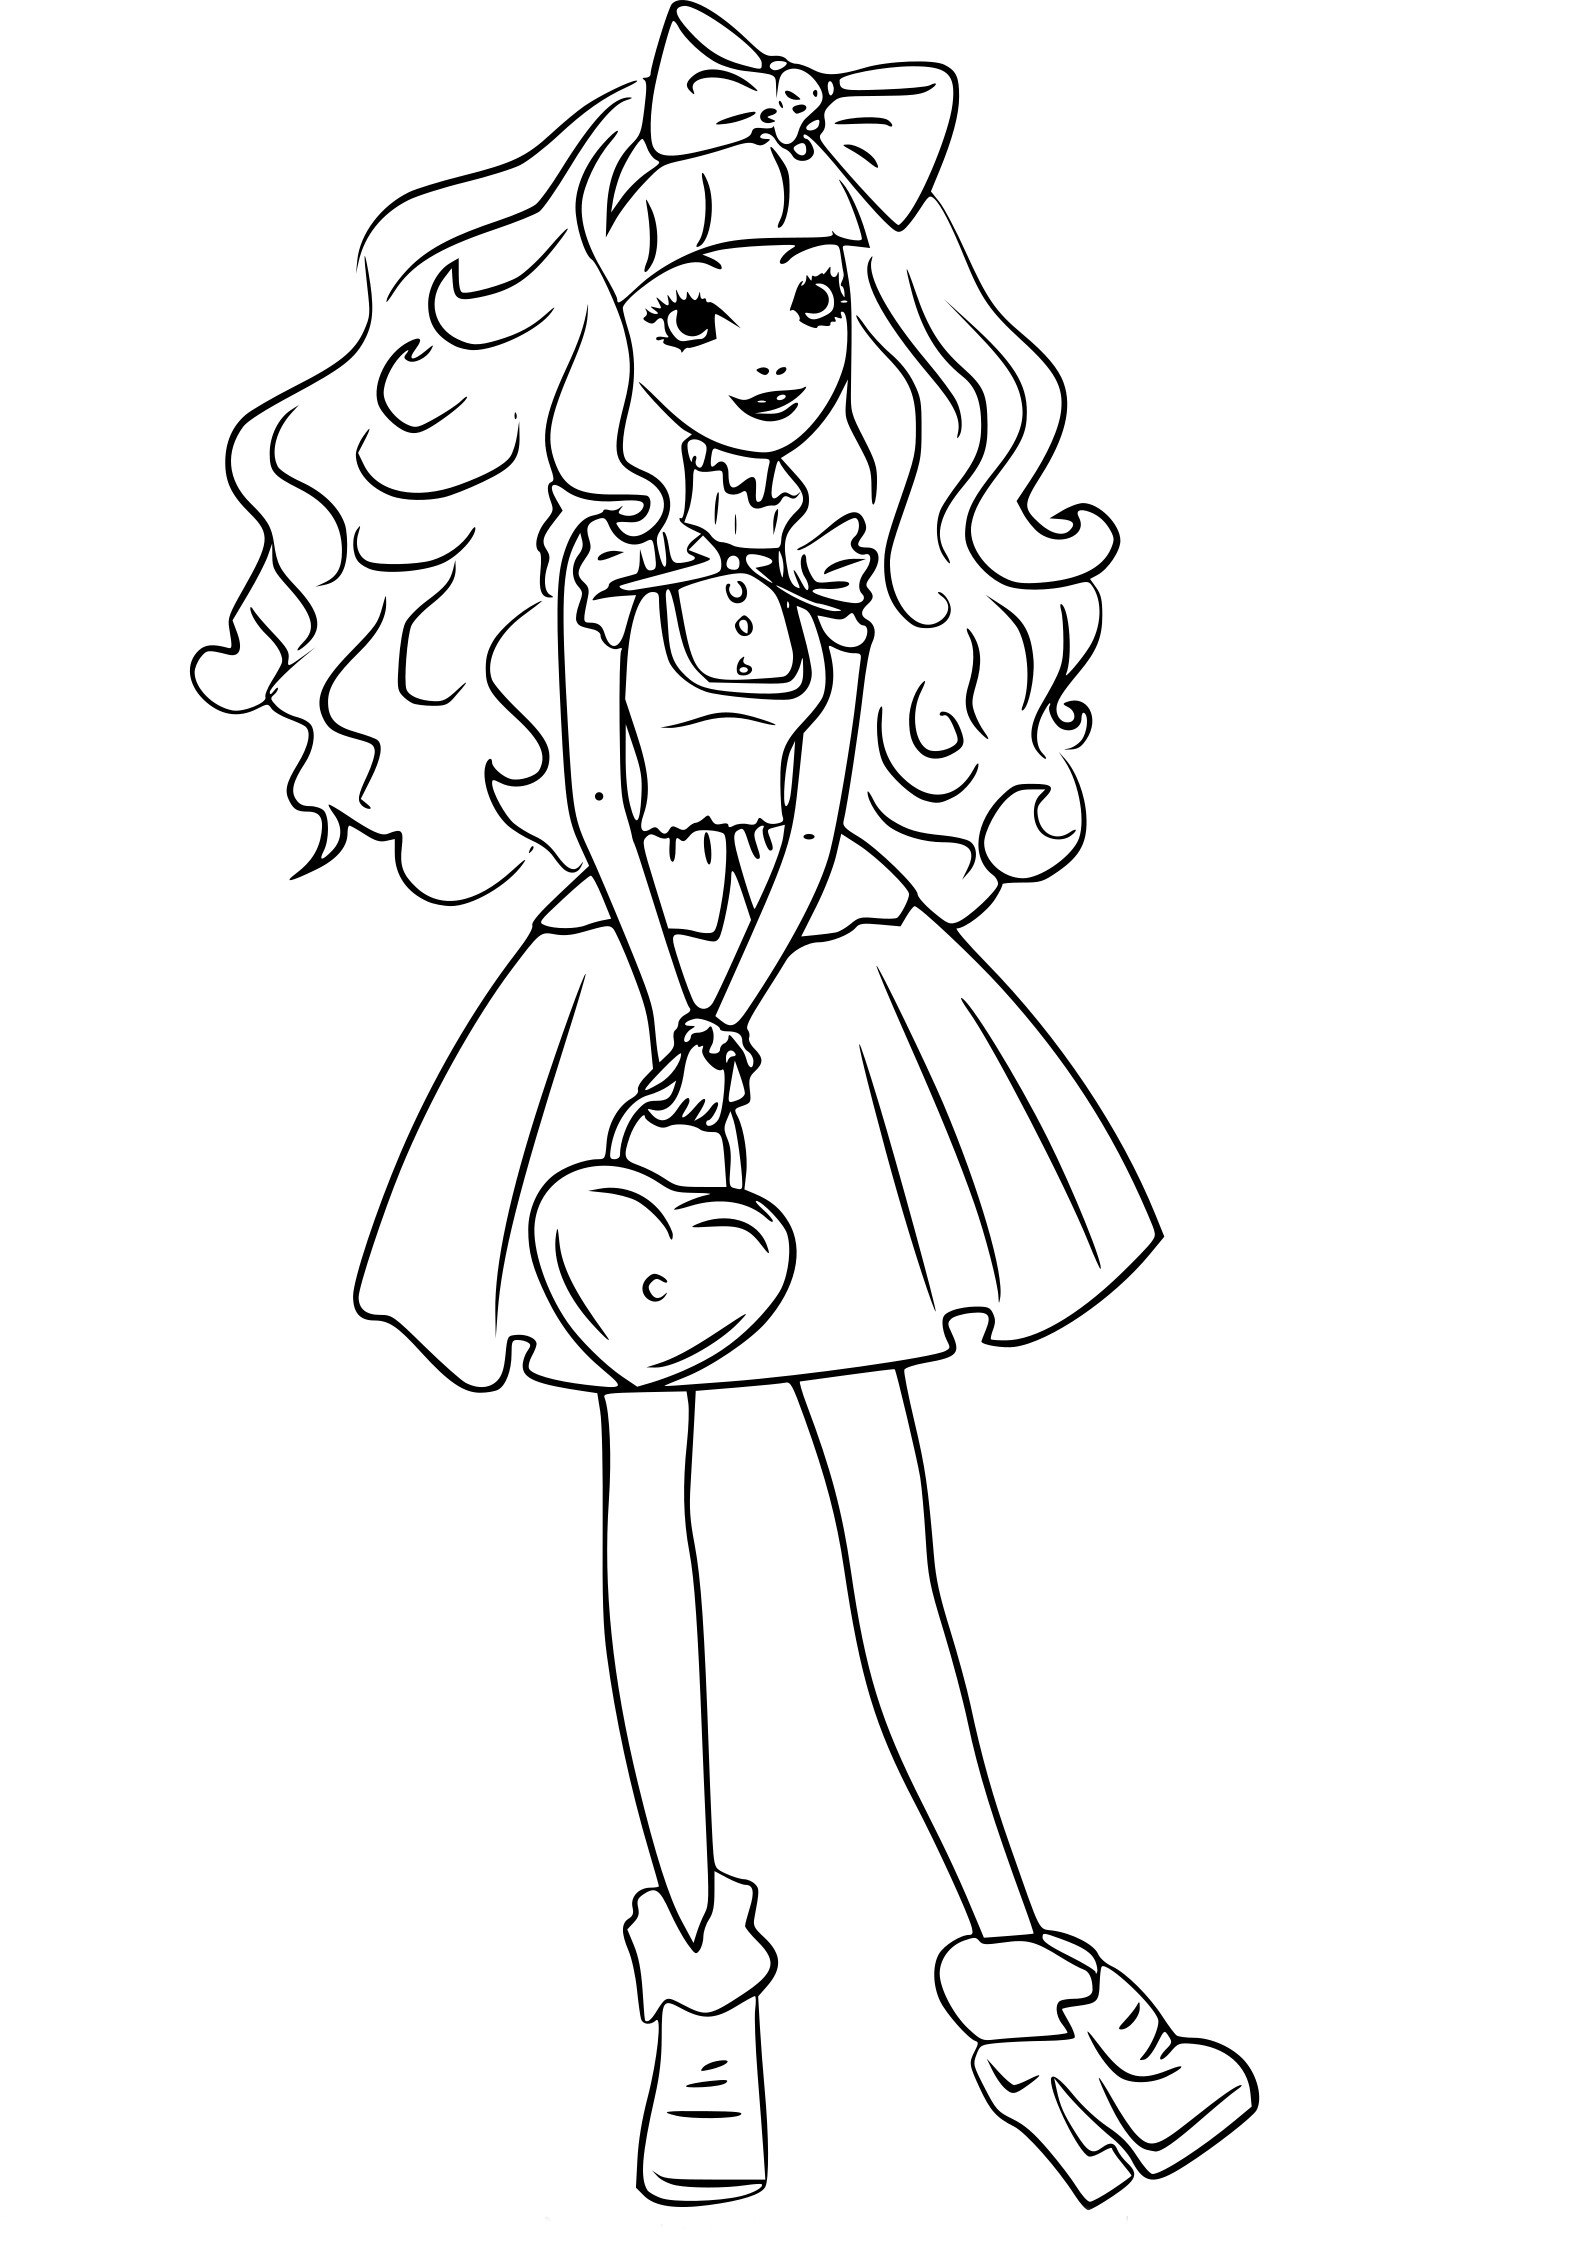 Blondie Lockes Ever After High coloring page